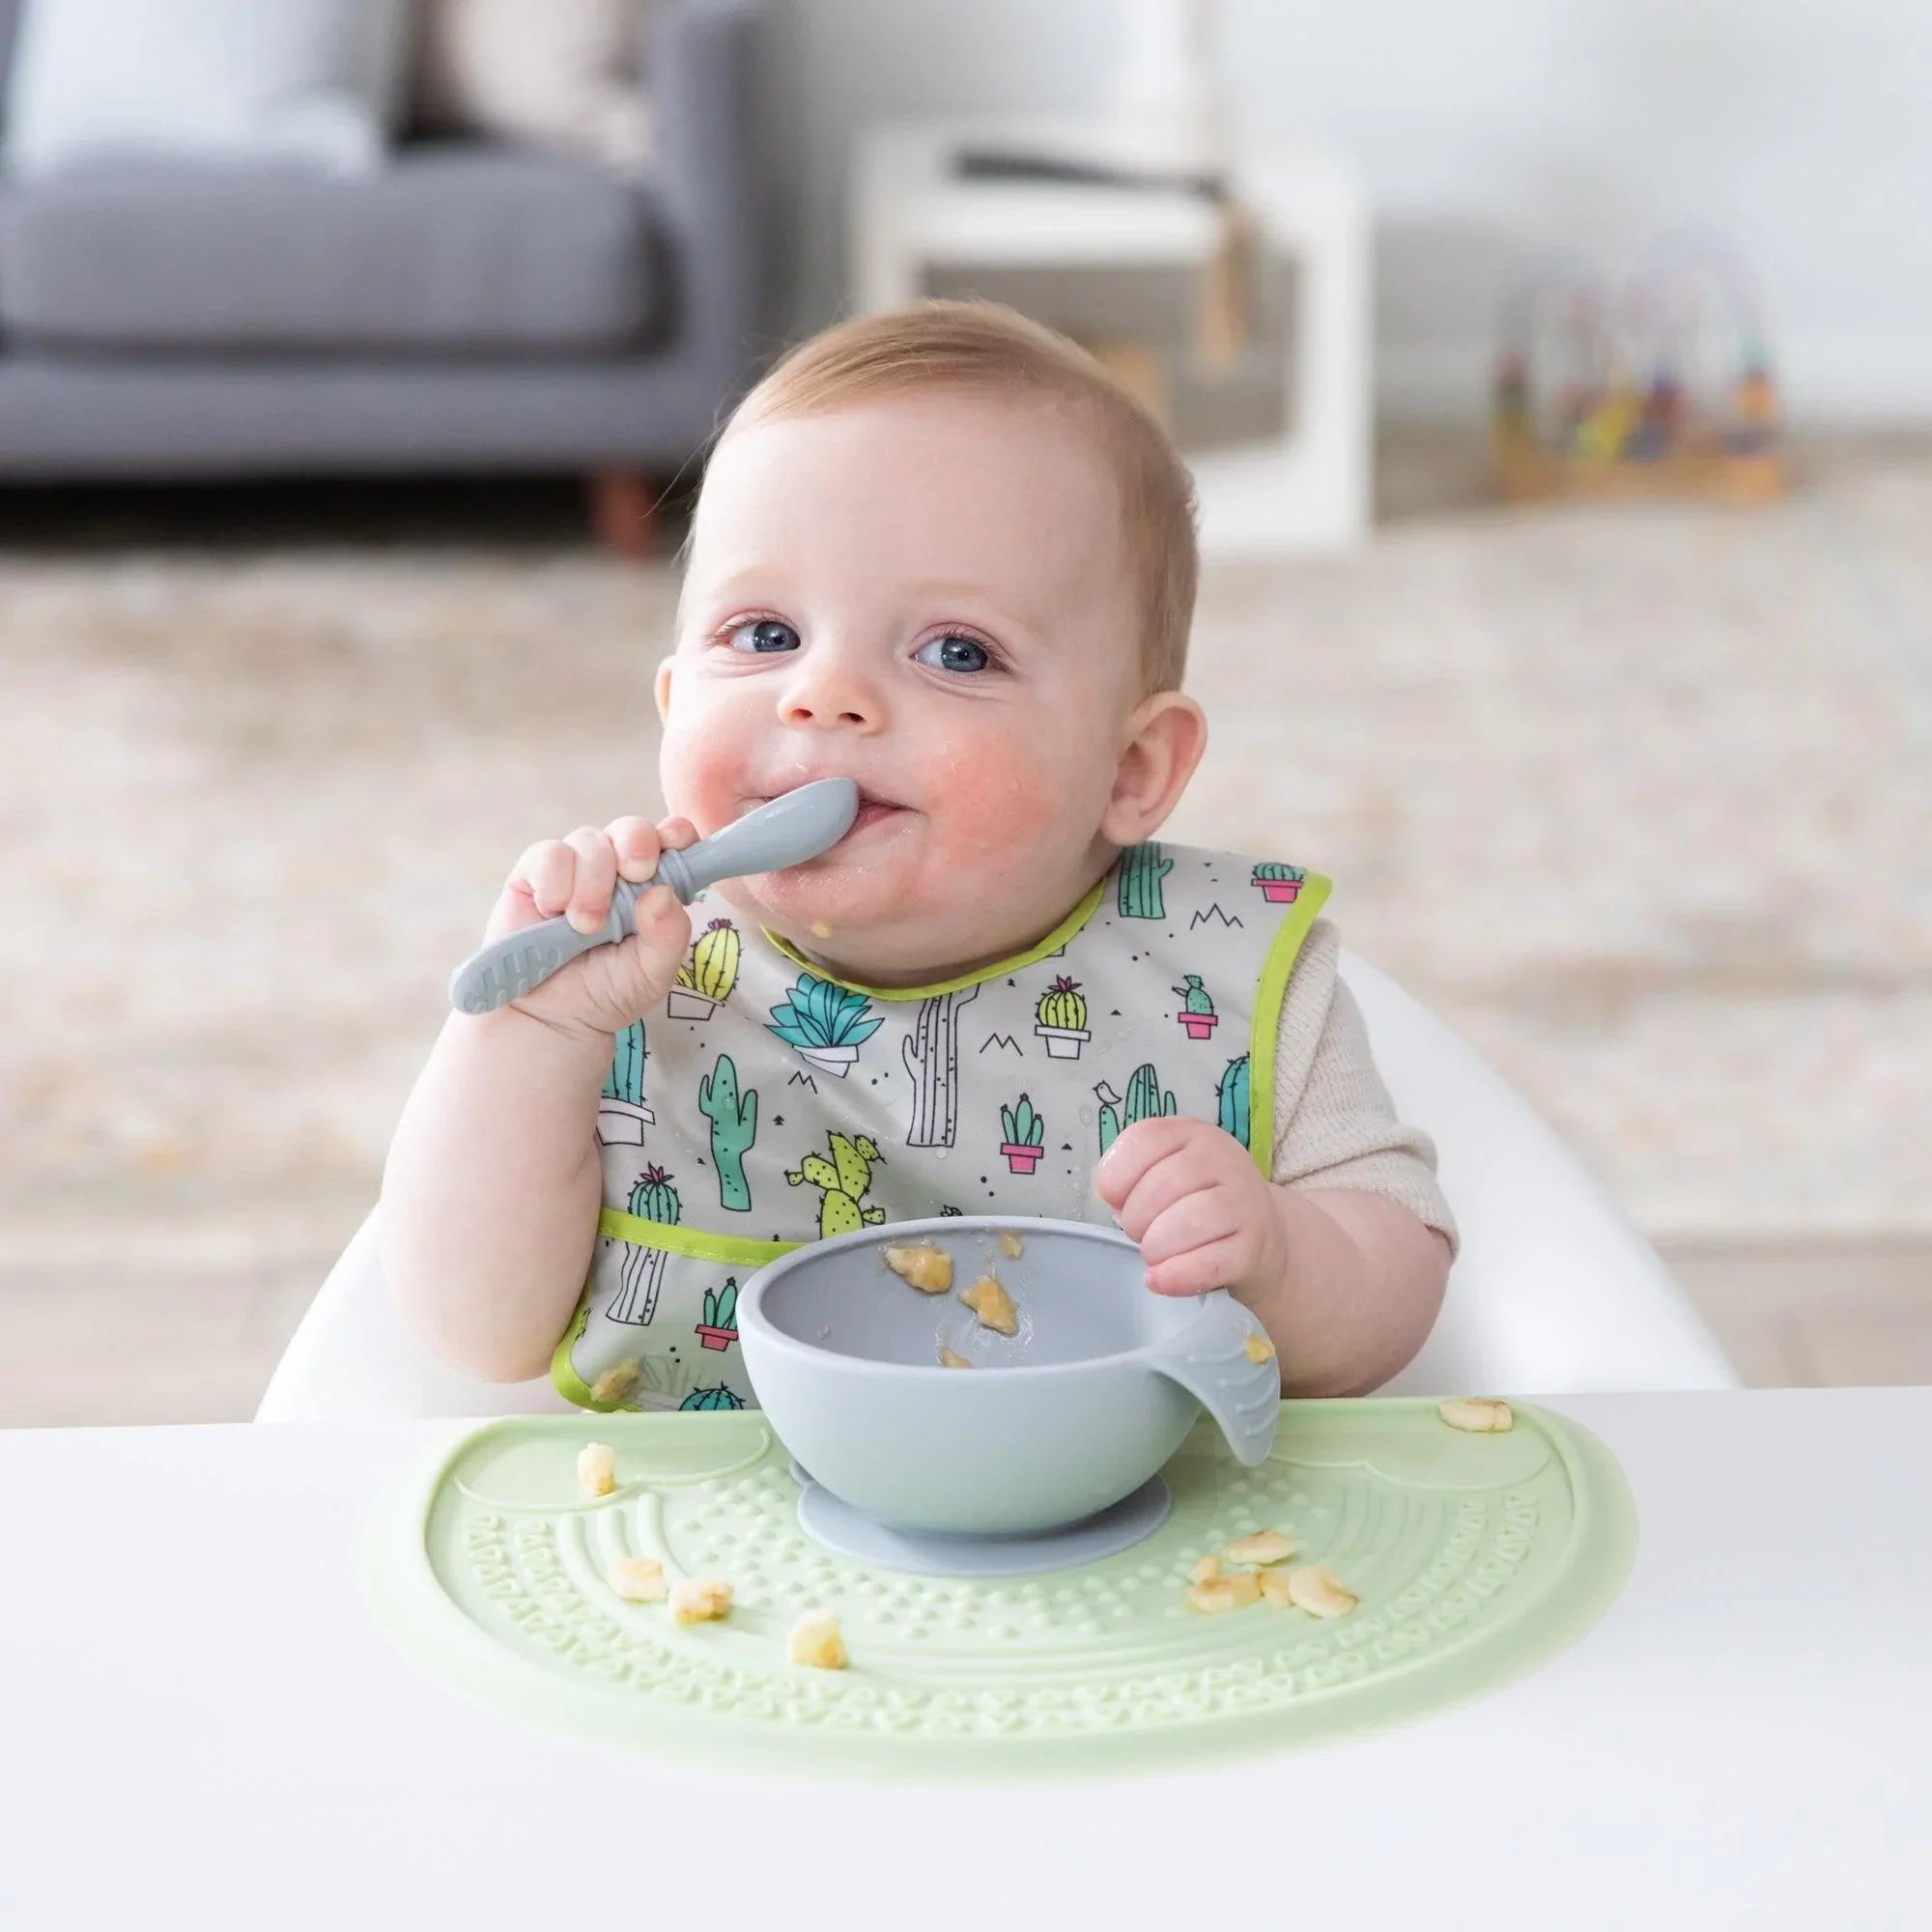 Functional Silicone Baby Bowl and Baby Spoon Set for BLW